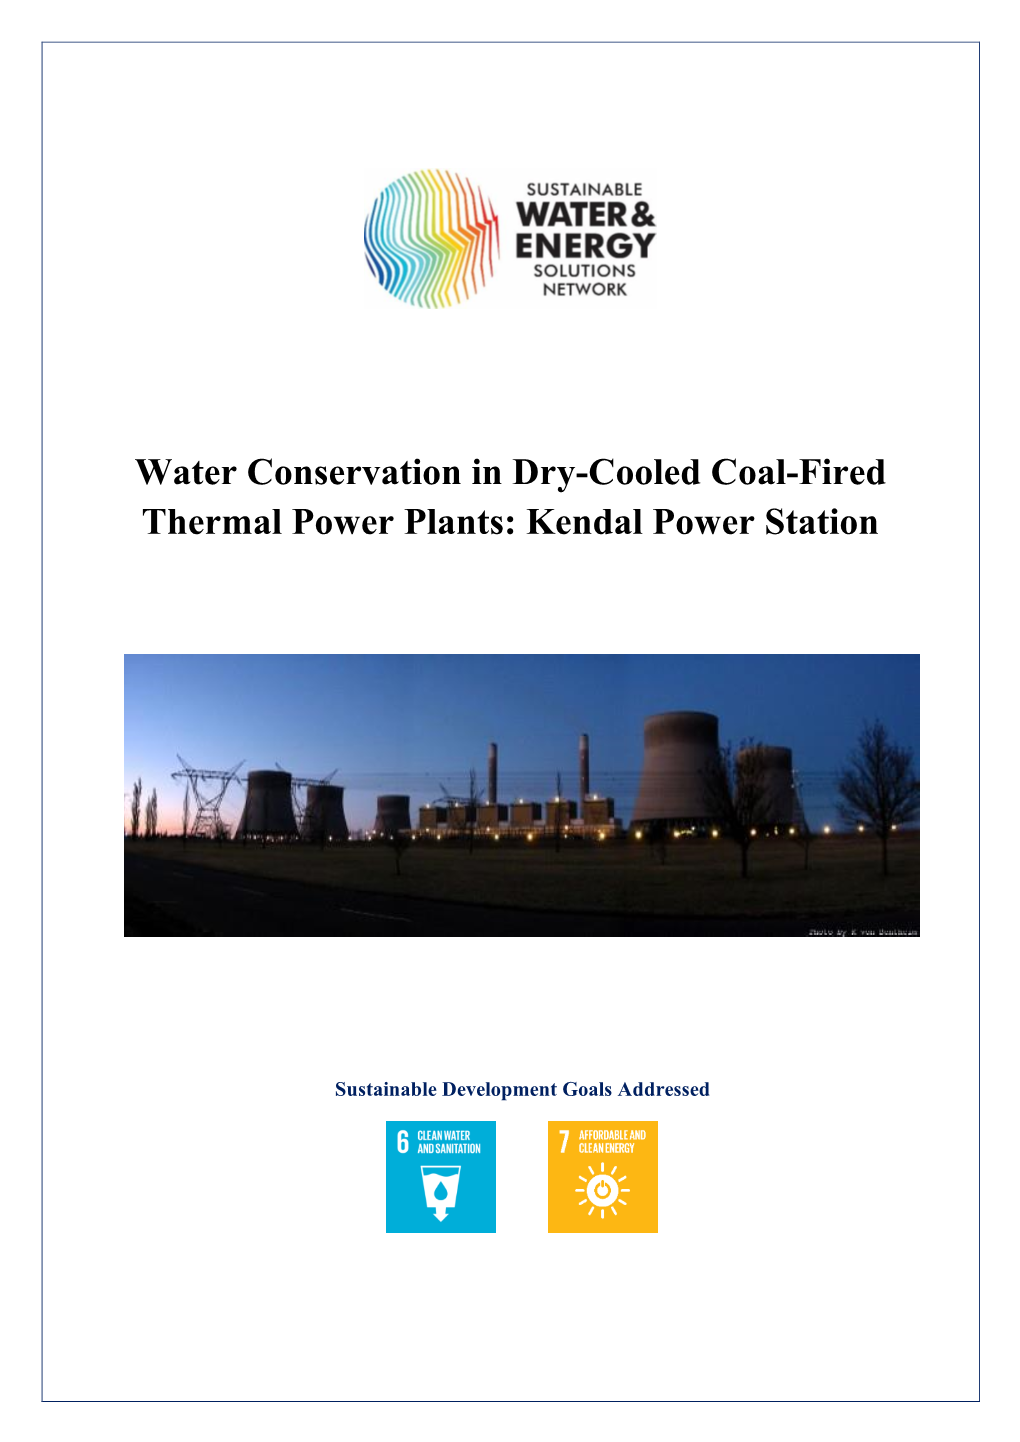 Water Conservation in Dry-Cooled Coal-Fired Thermal Power Plants: Kendal Power Station